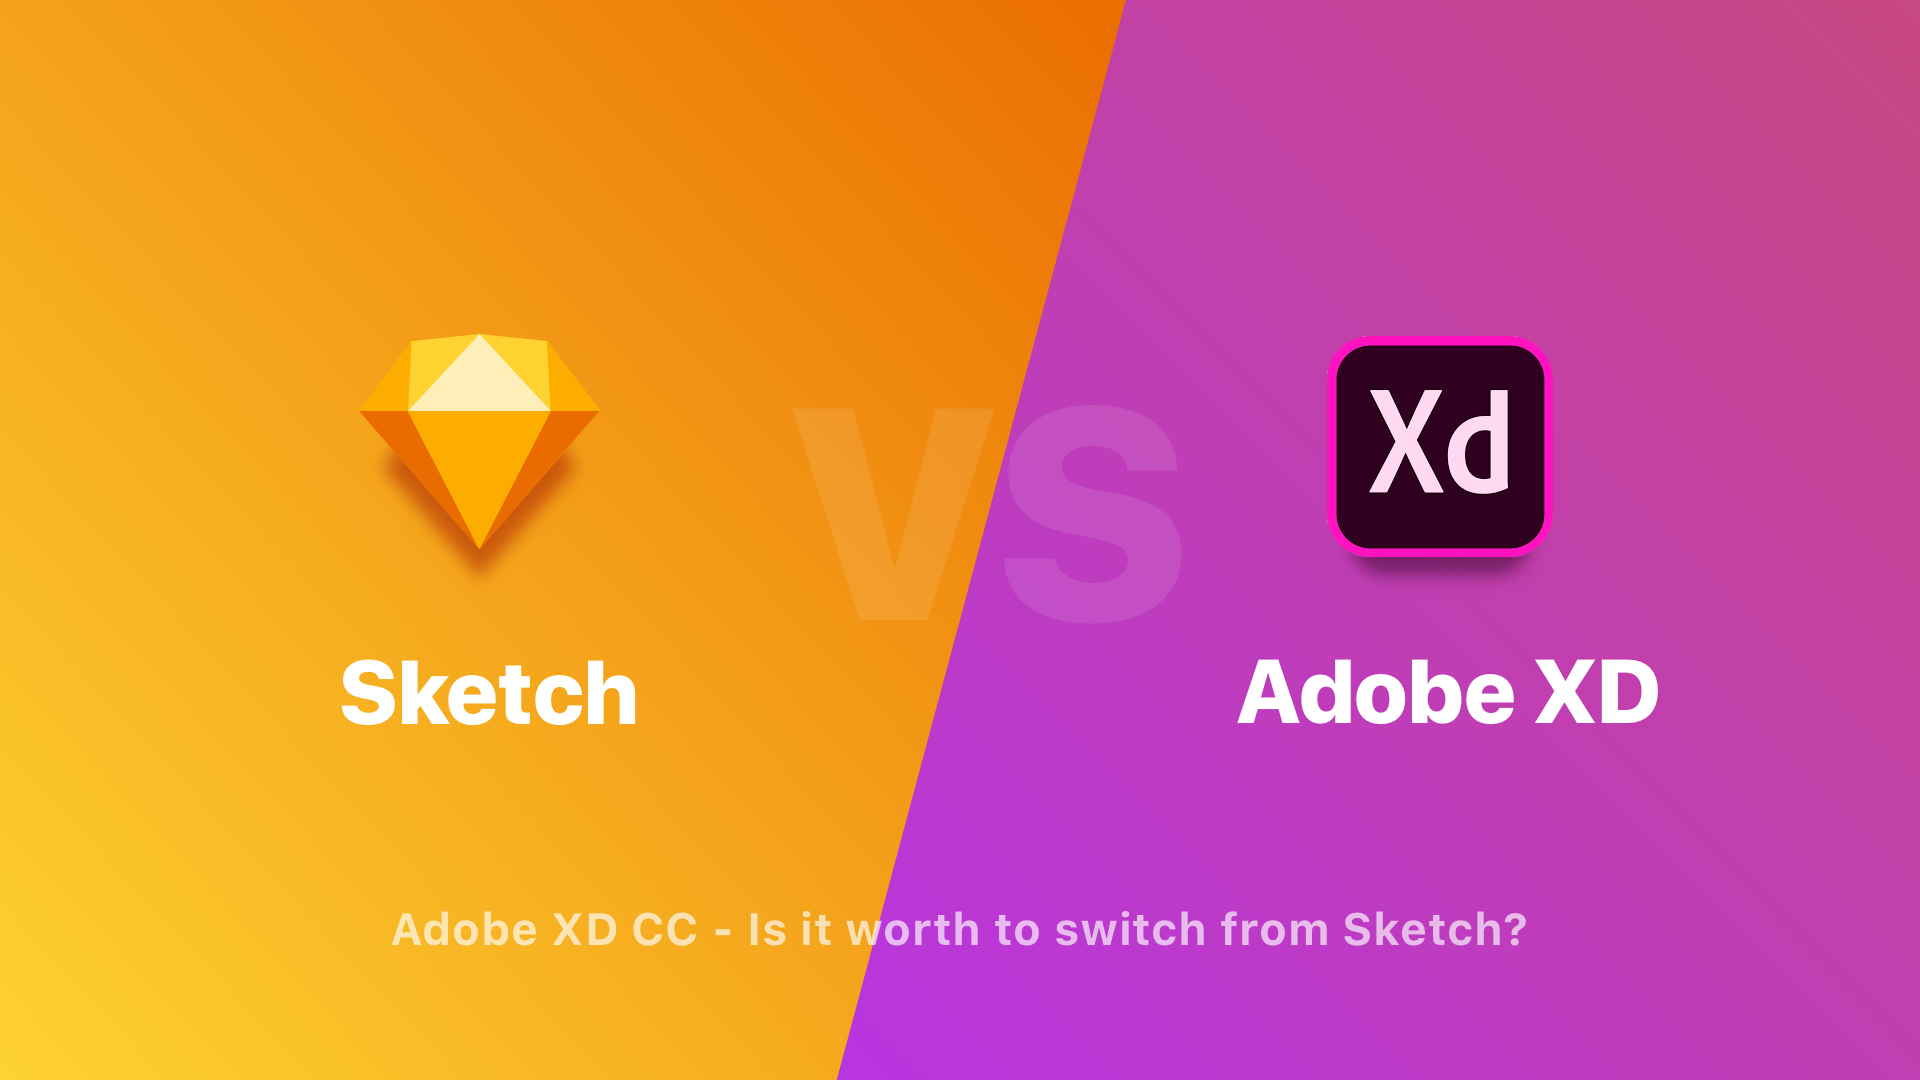 Tips to use source files across Sketch, Adobe XD and Figma platforms